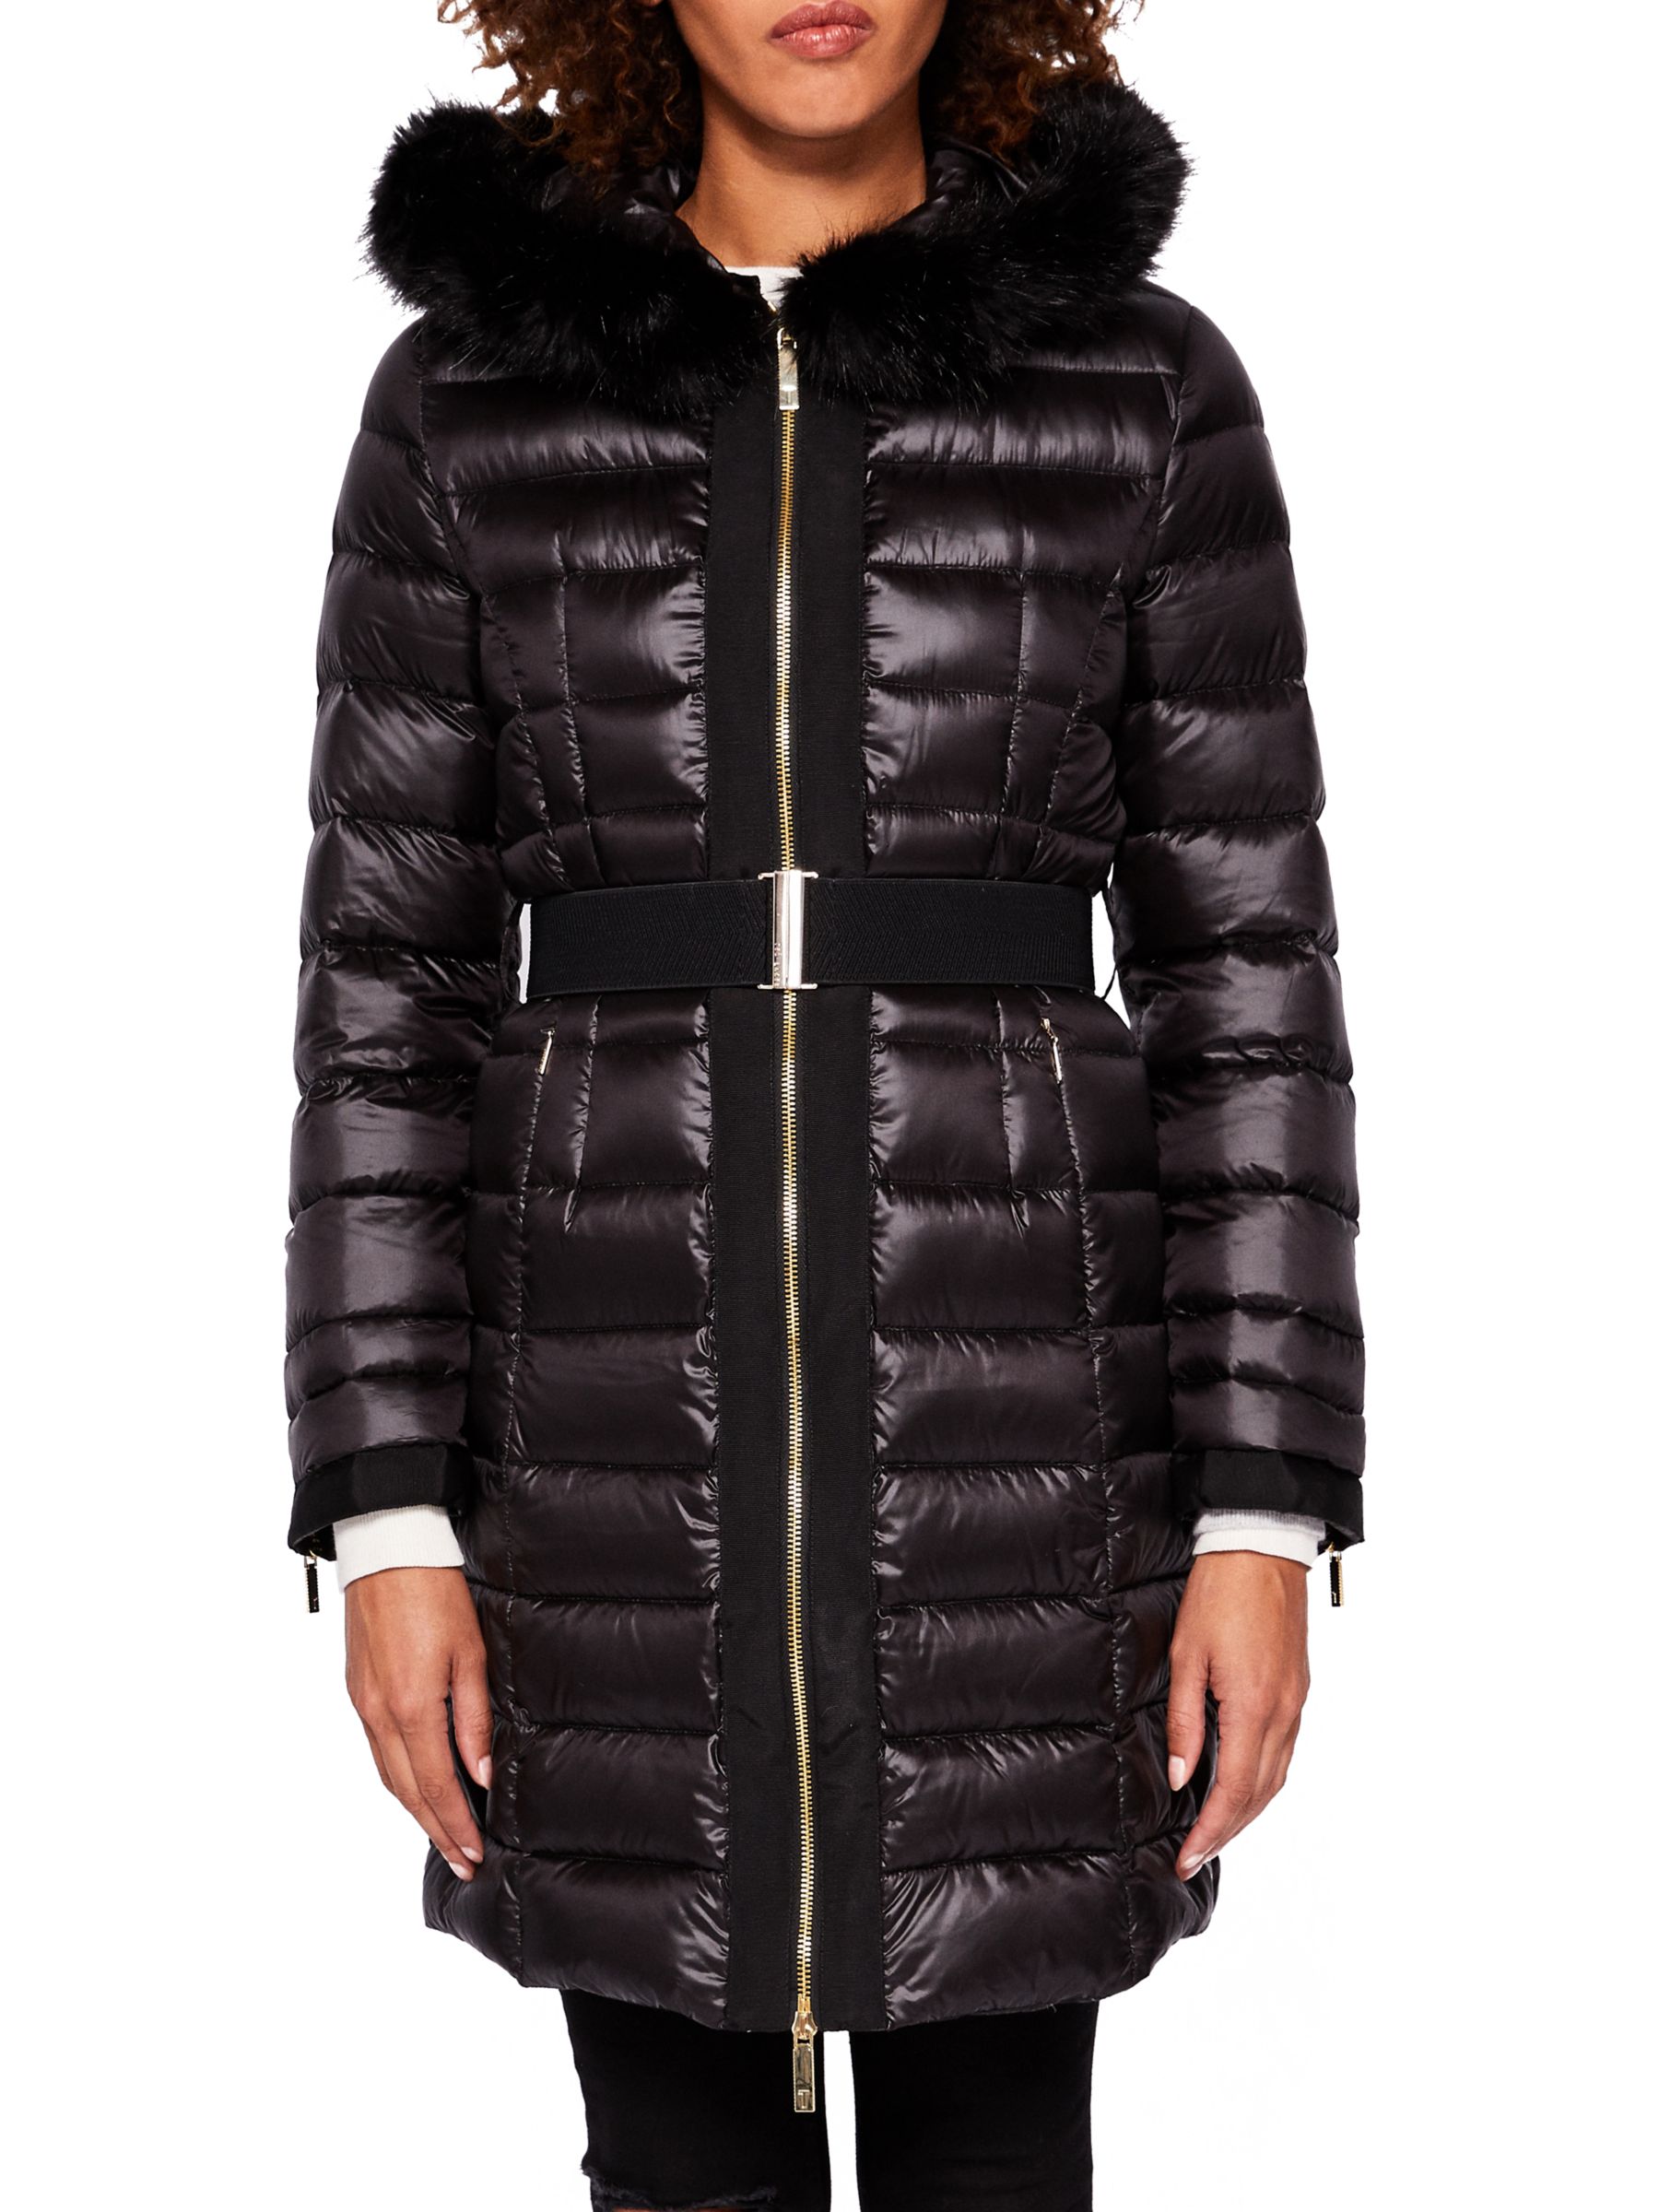 Ted Baker Puffer Jacket Ladies Hotsell, 50% OFF | www.hcb.cat